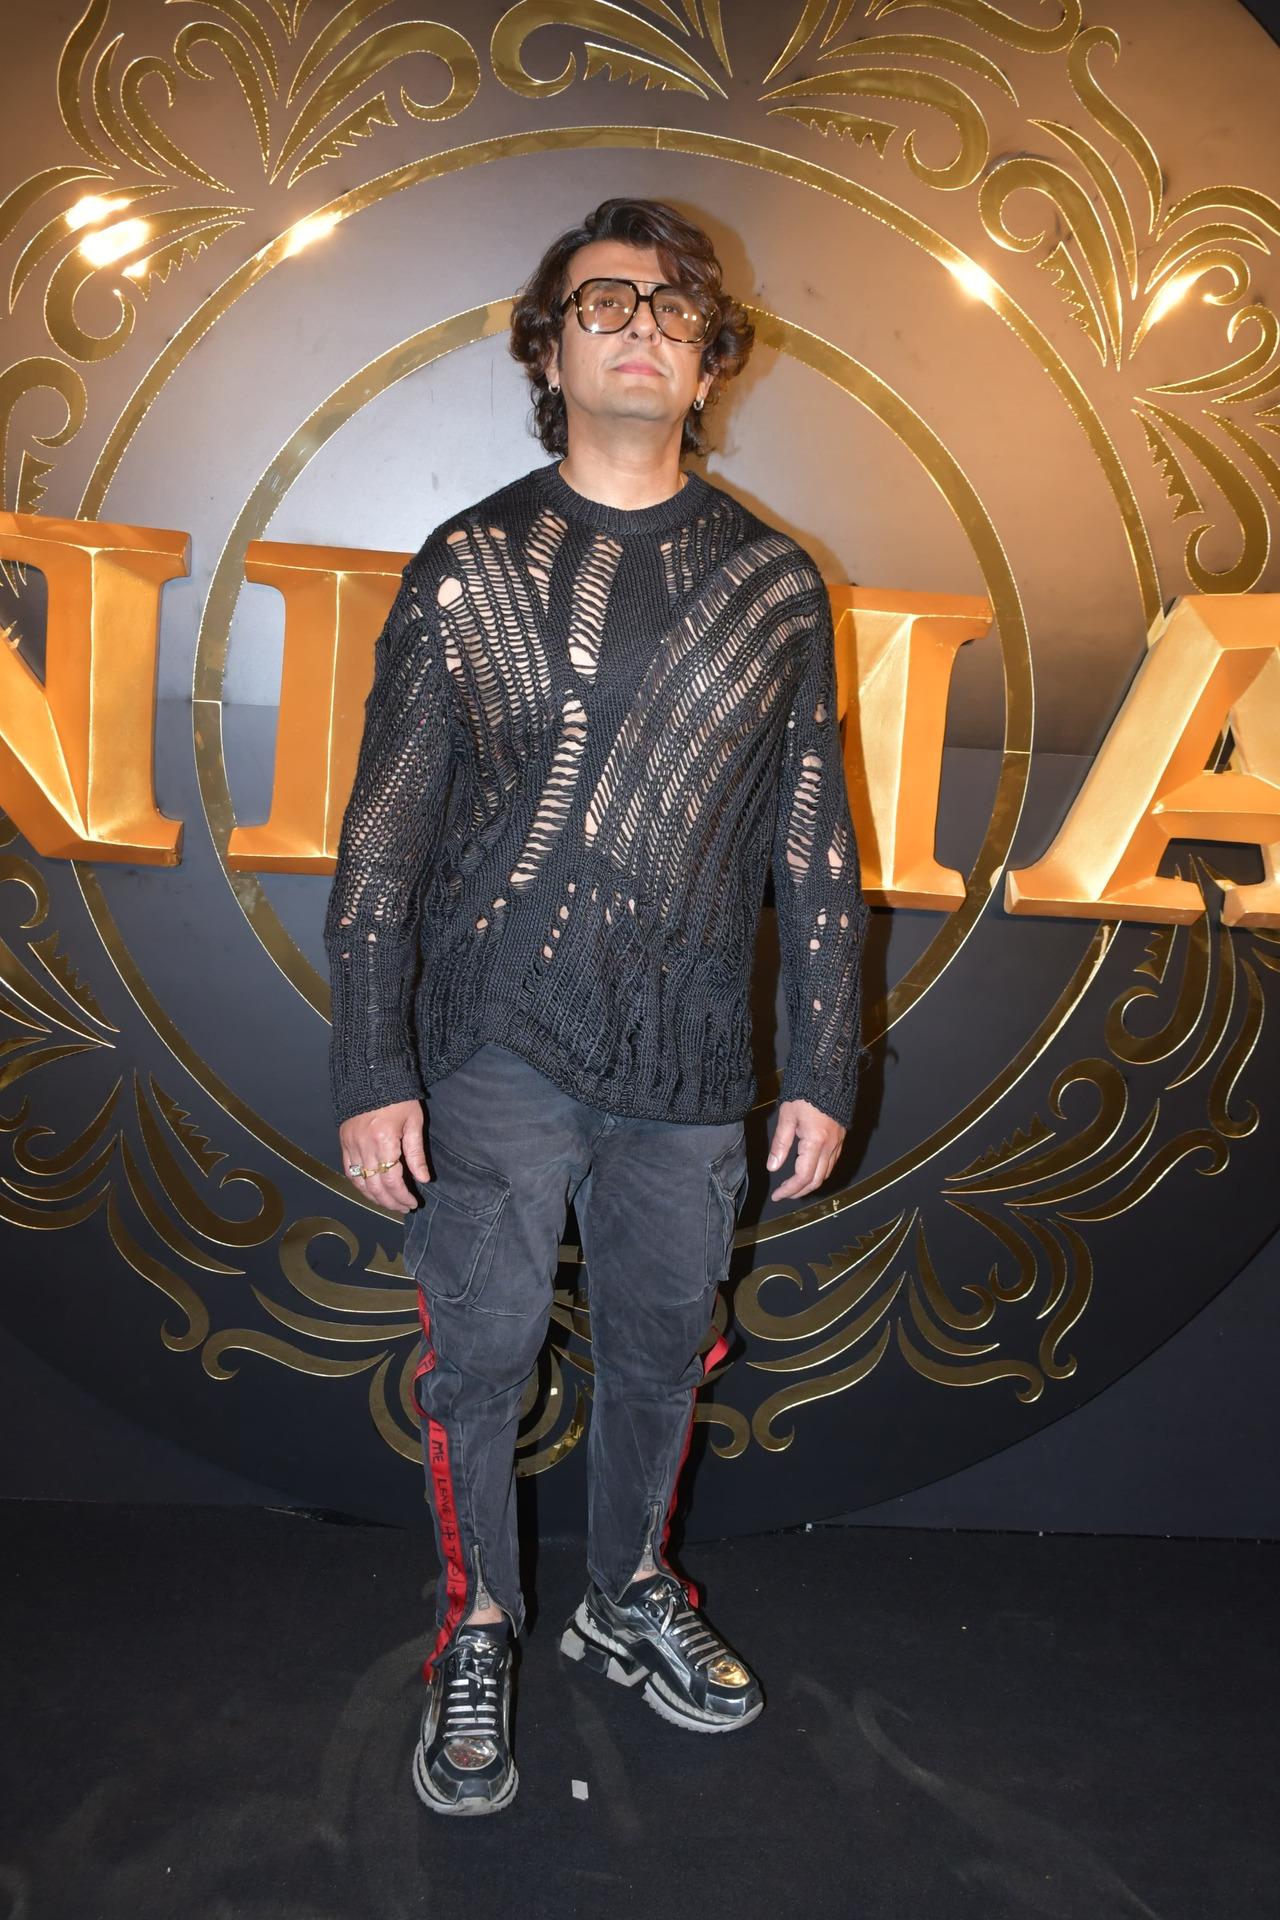 Singer Sonu Nigam who sang the song 'Papa Meri Jaan' from the film Animal also graced the party